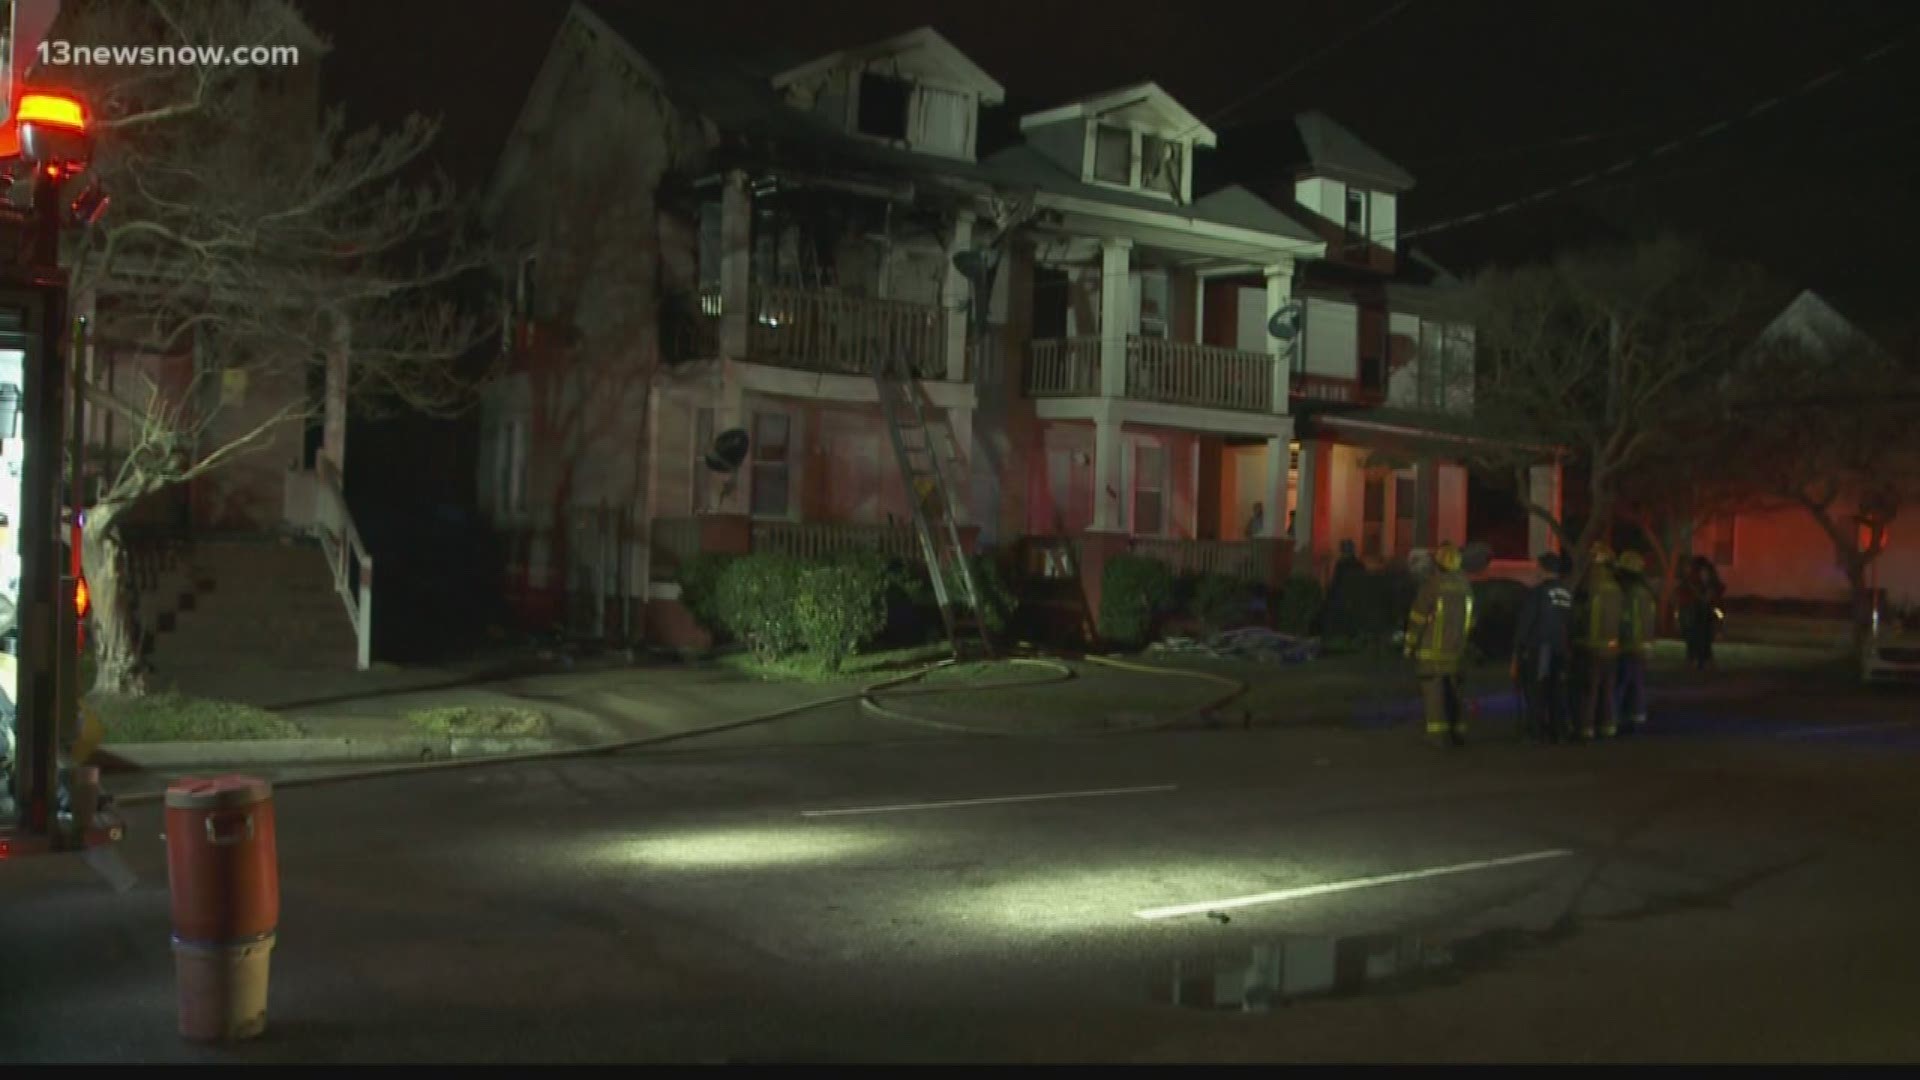 A family was displaced after a fire damaged an apartment in Norfolk Saturday night